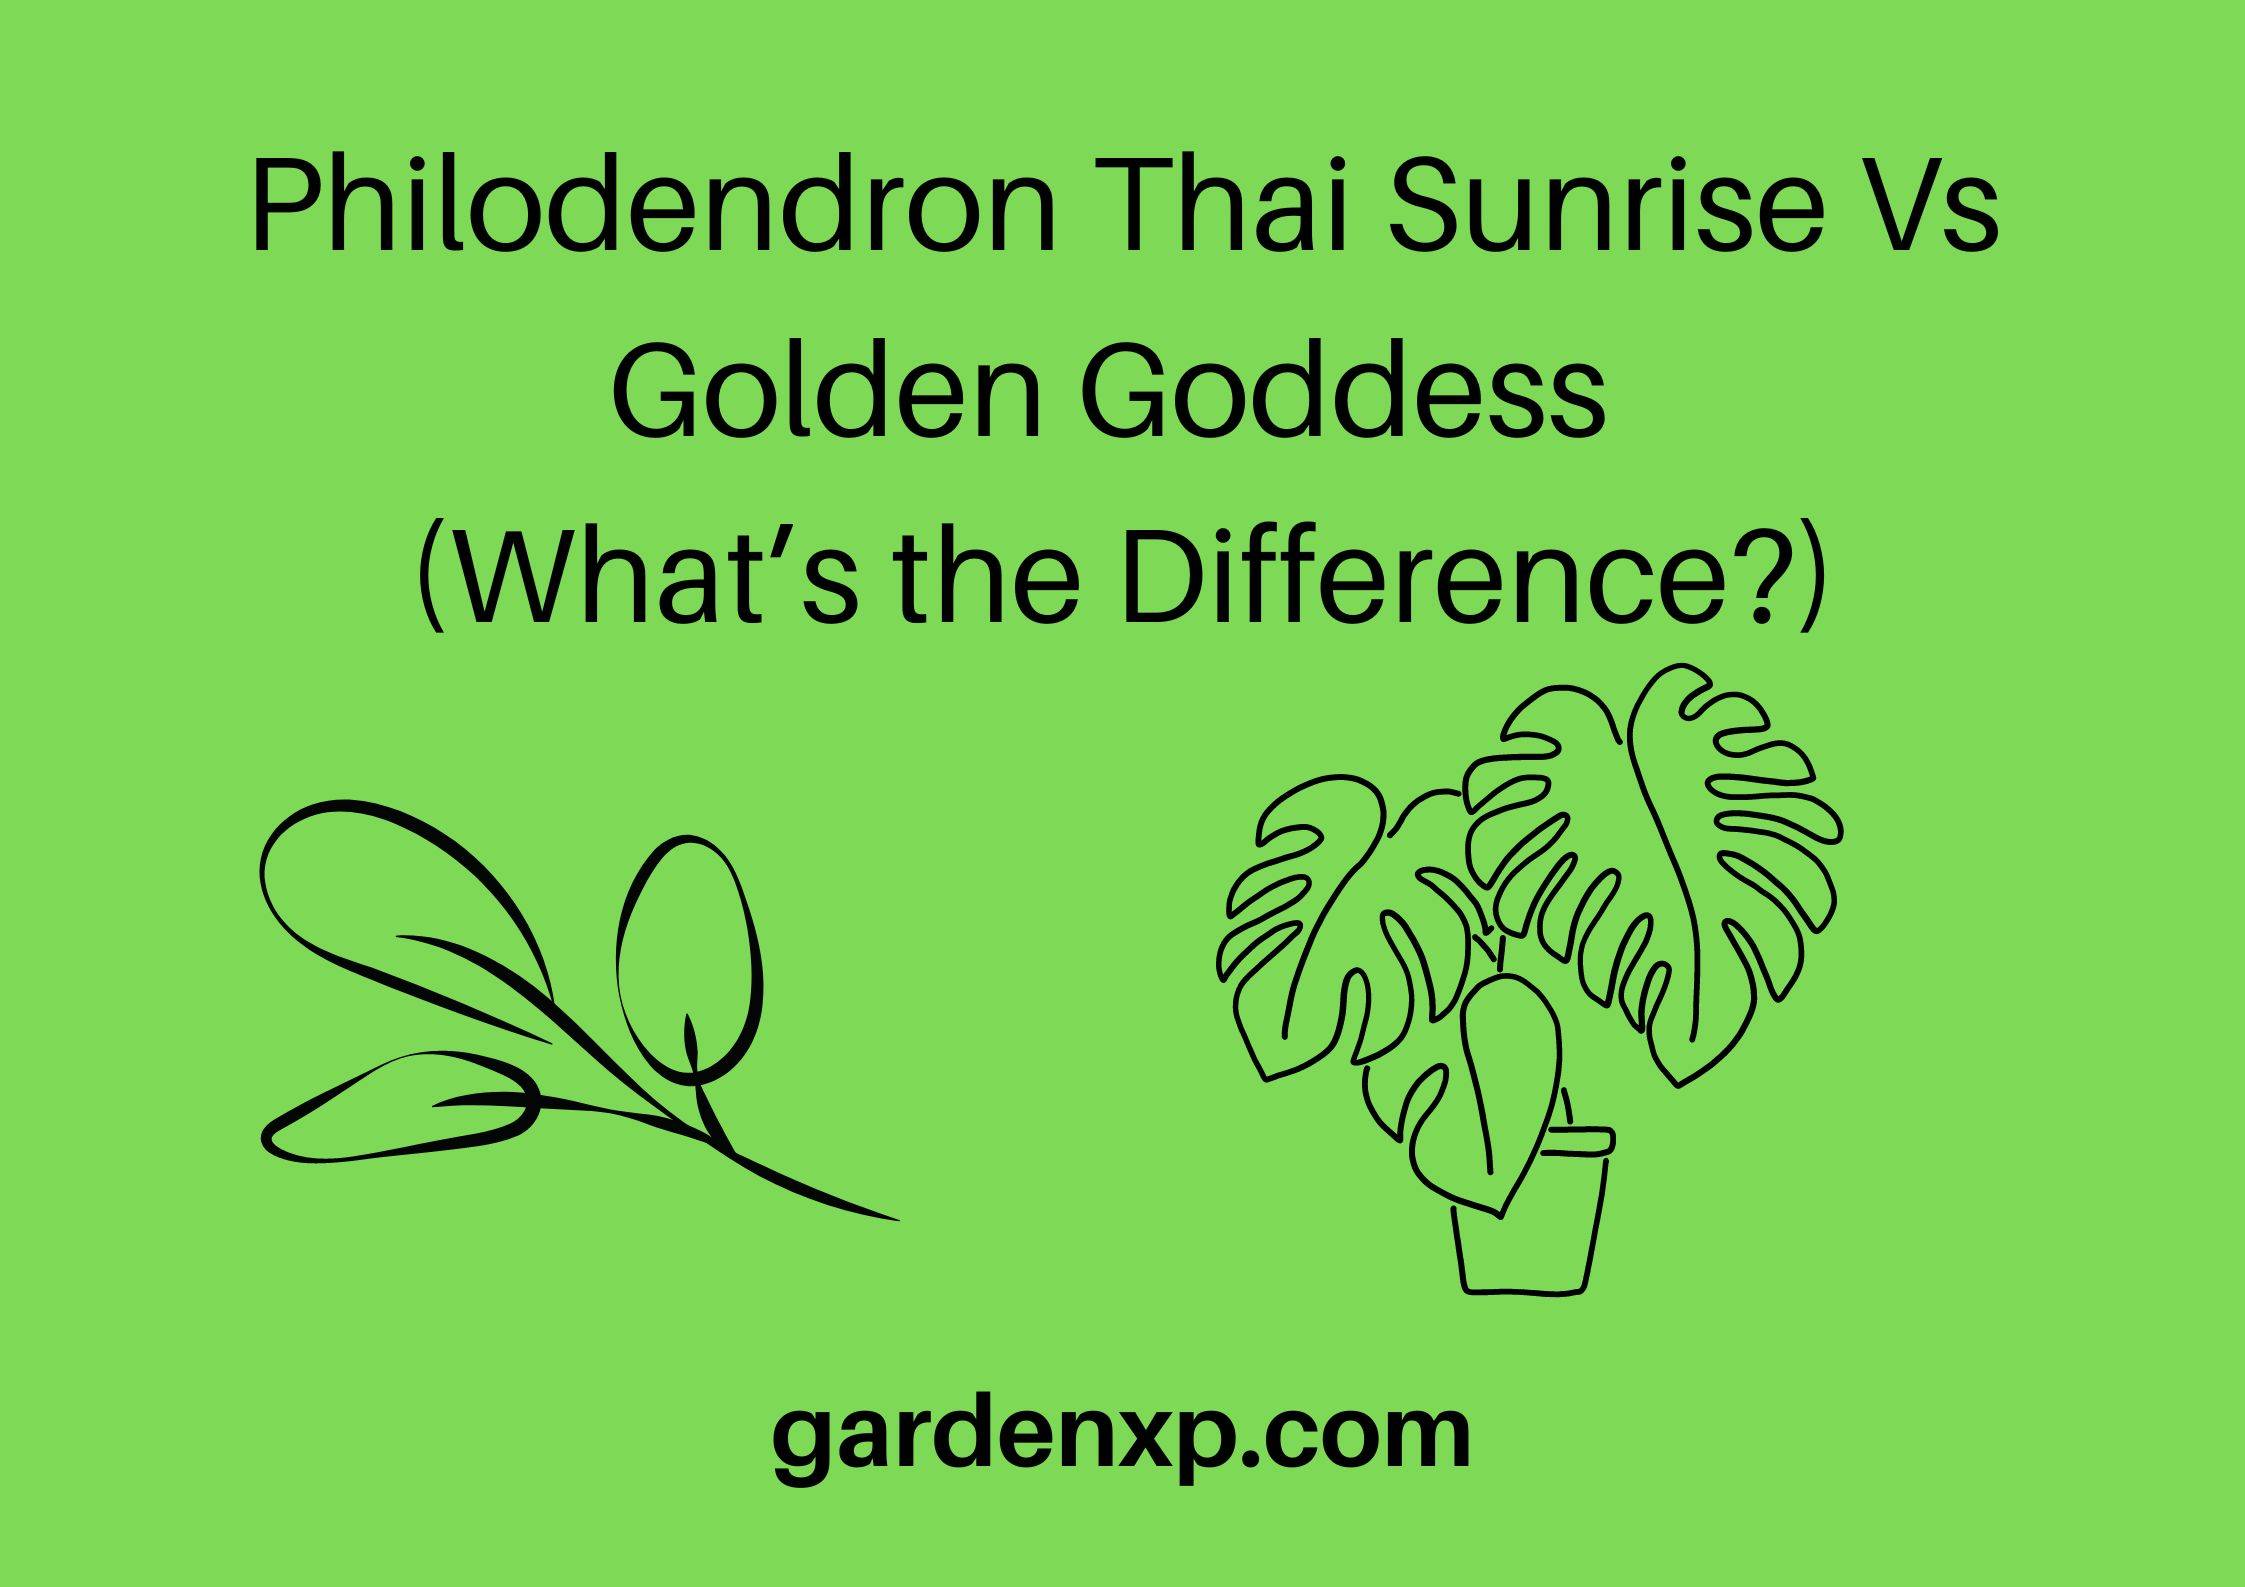 Philodendron Thai Sunrise Vs Golden Goddess (What’s the Difference?)